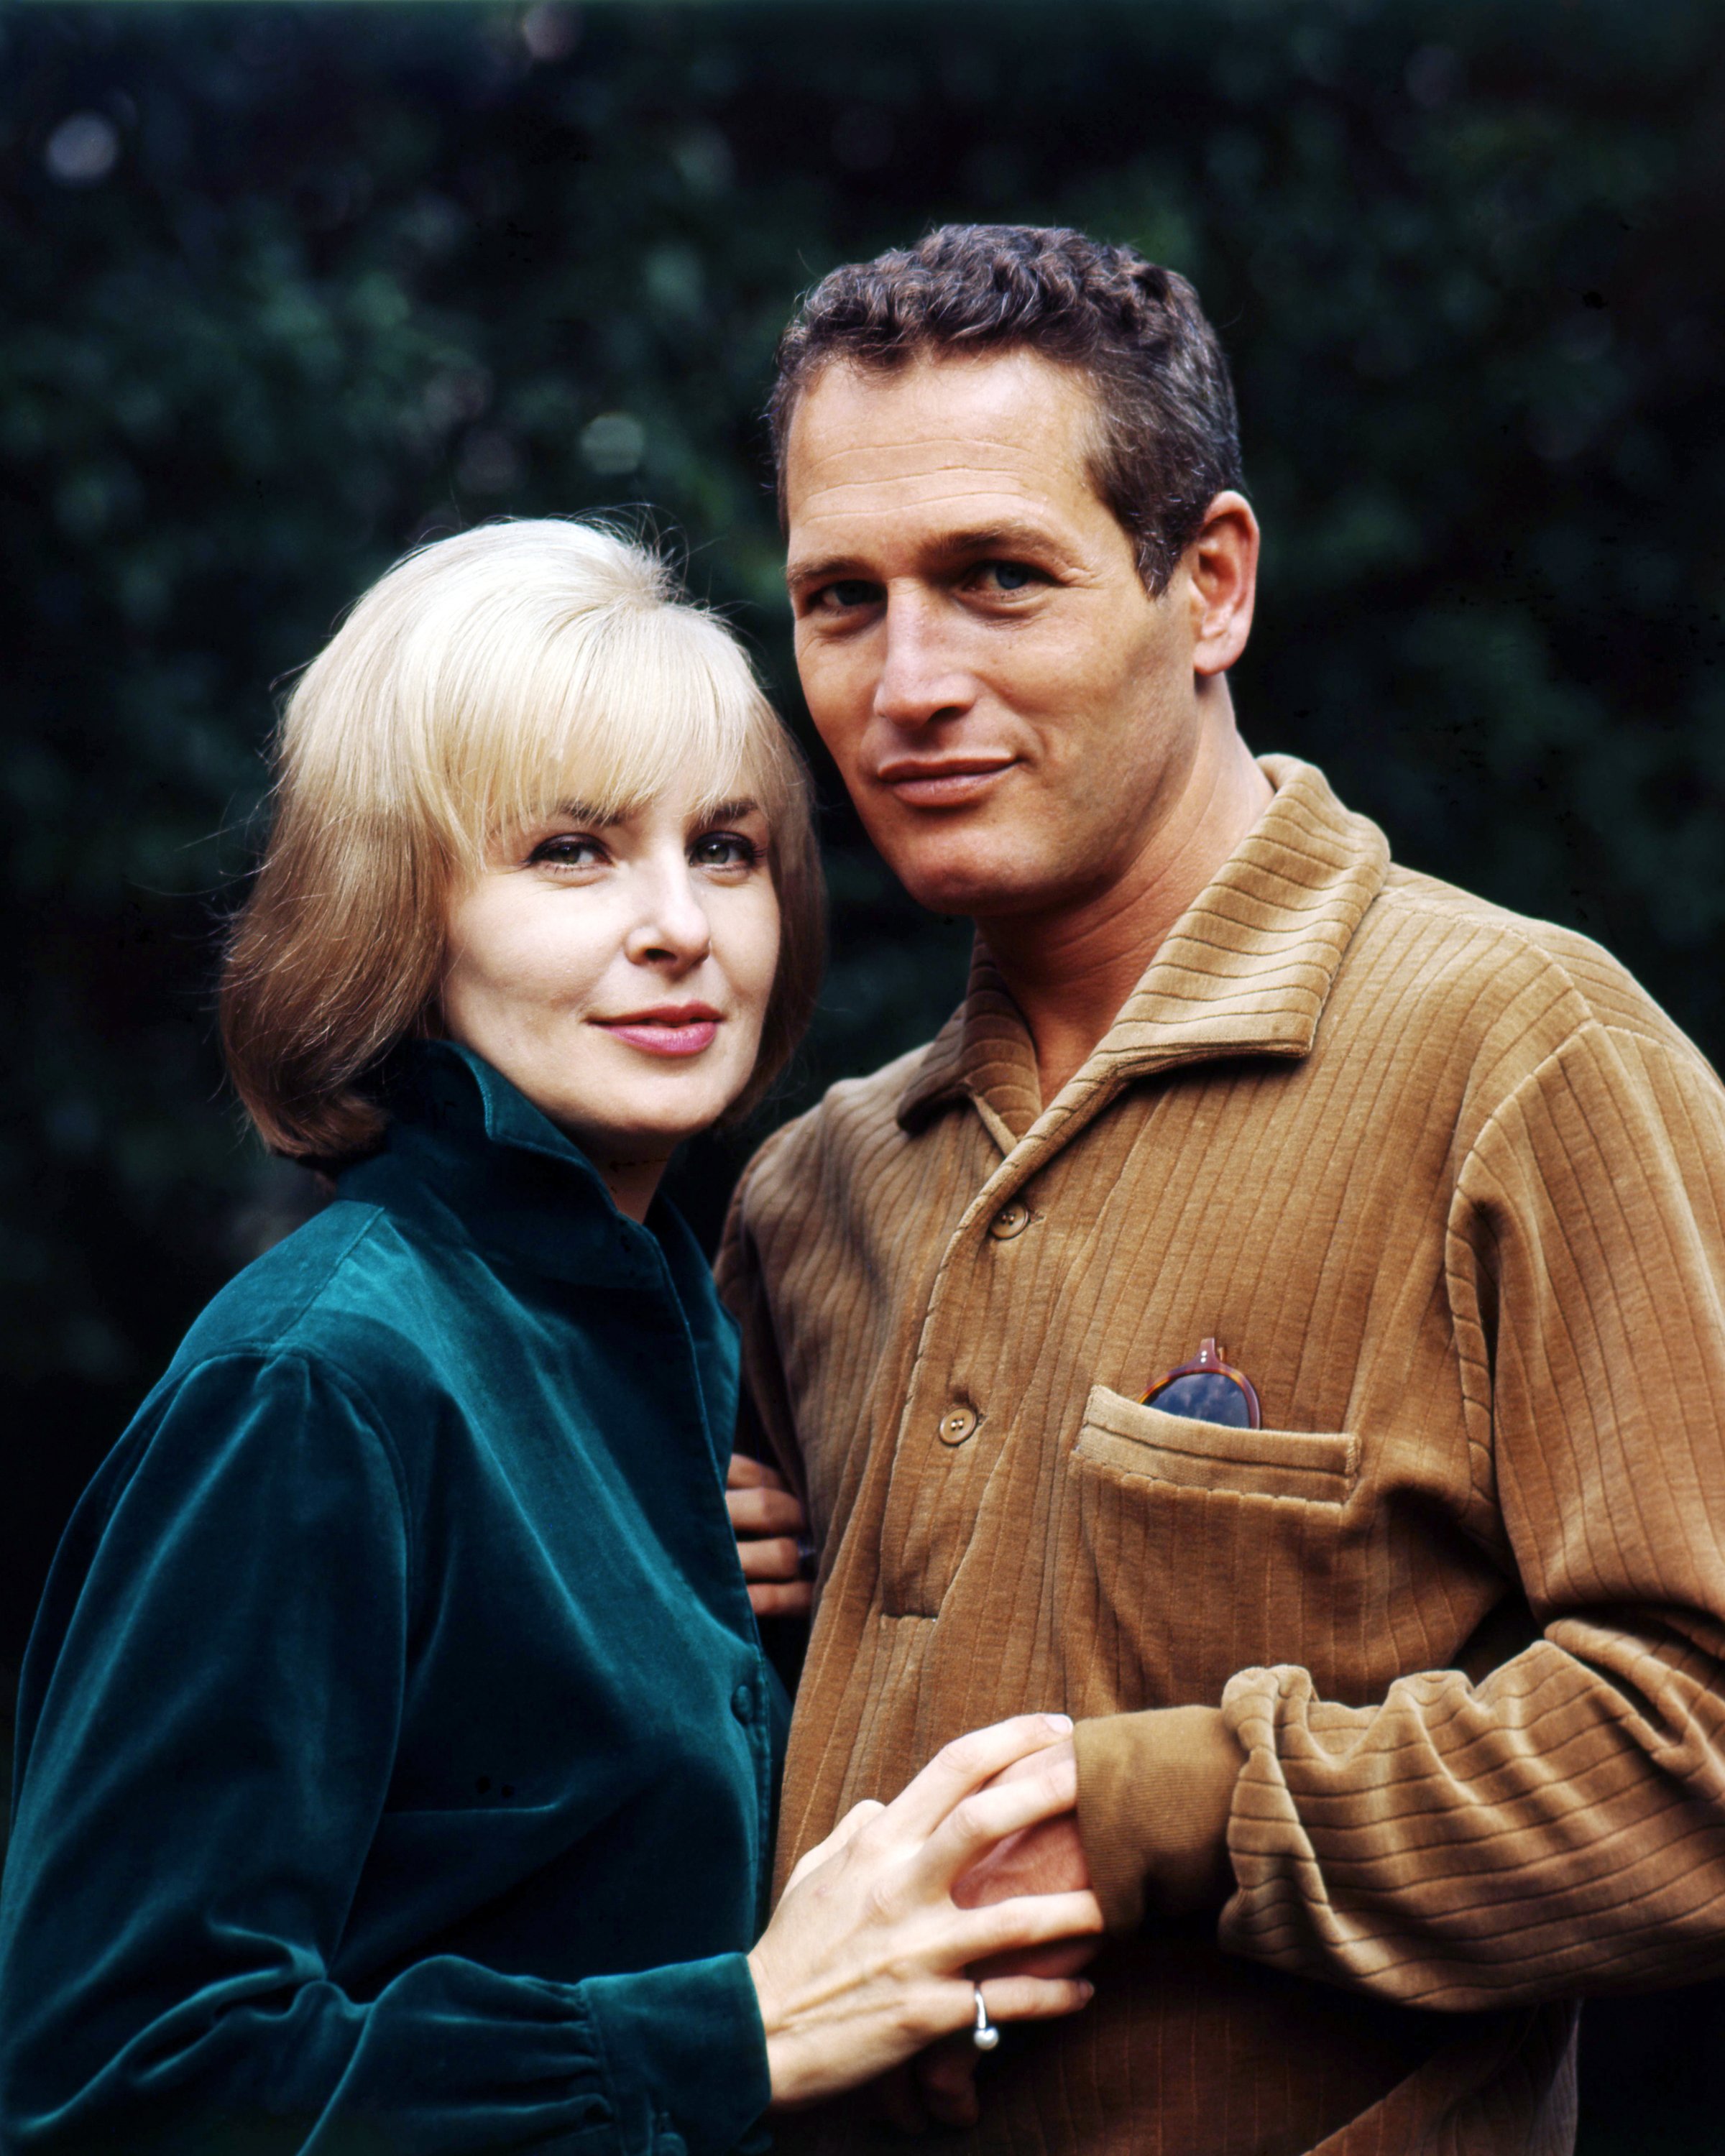 Actor Paul Newman and Joanne Woodward circa 1965 | Source: Getty Images